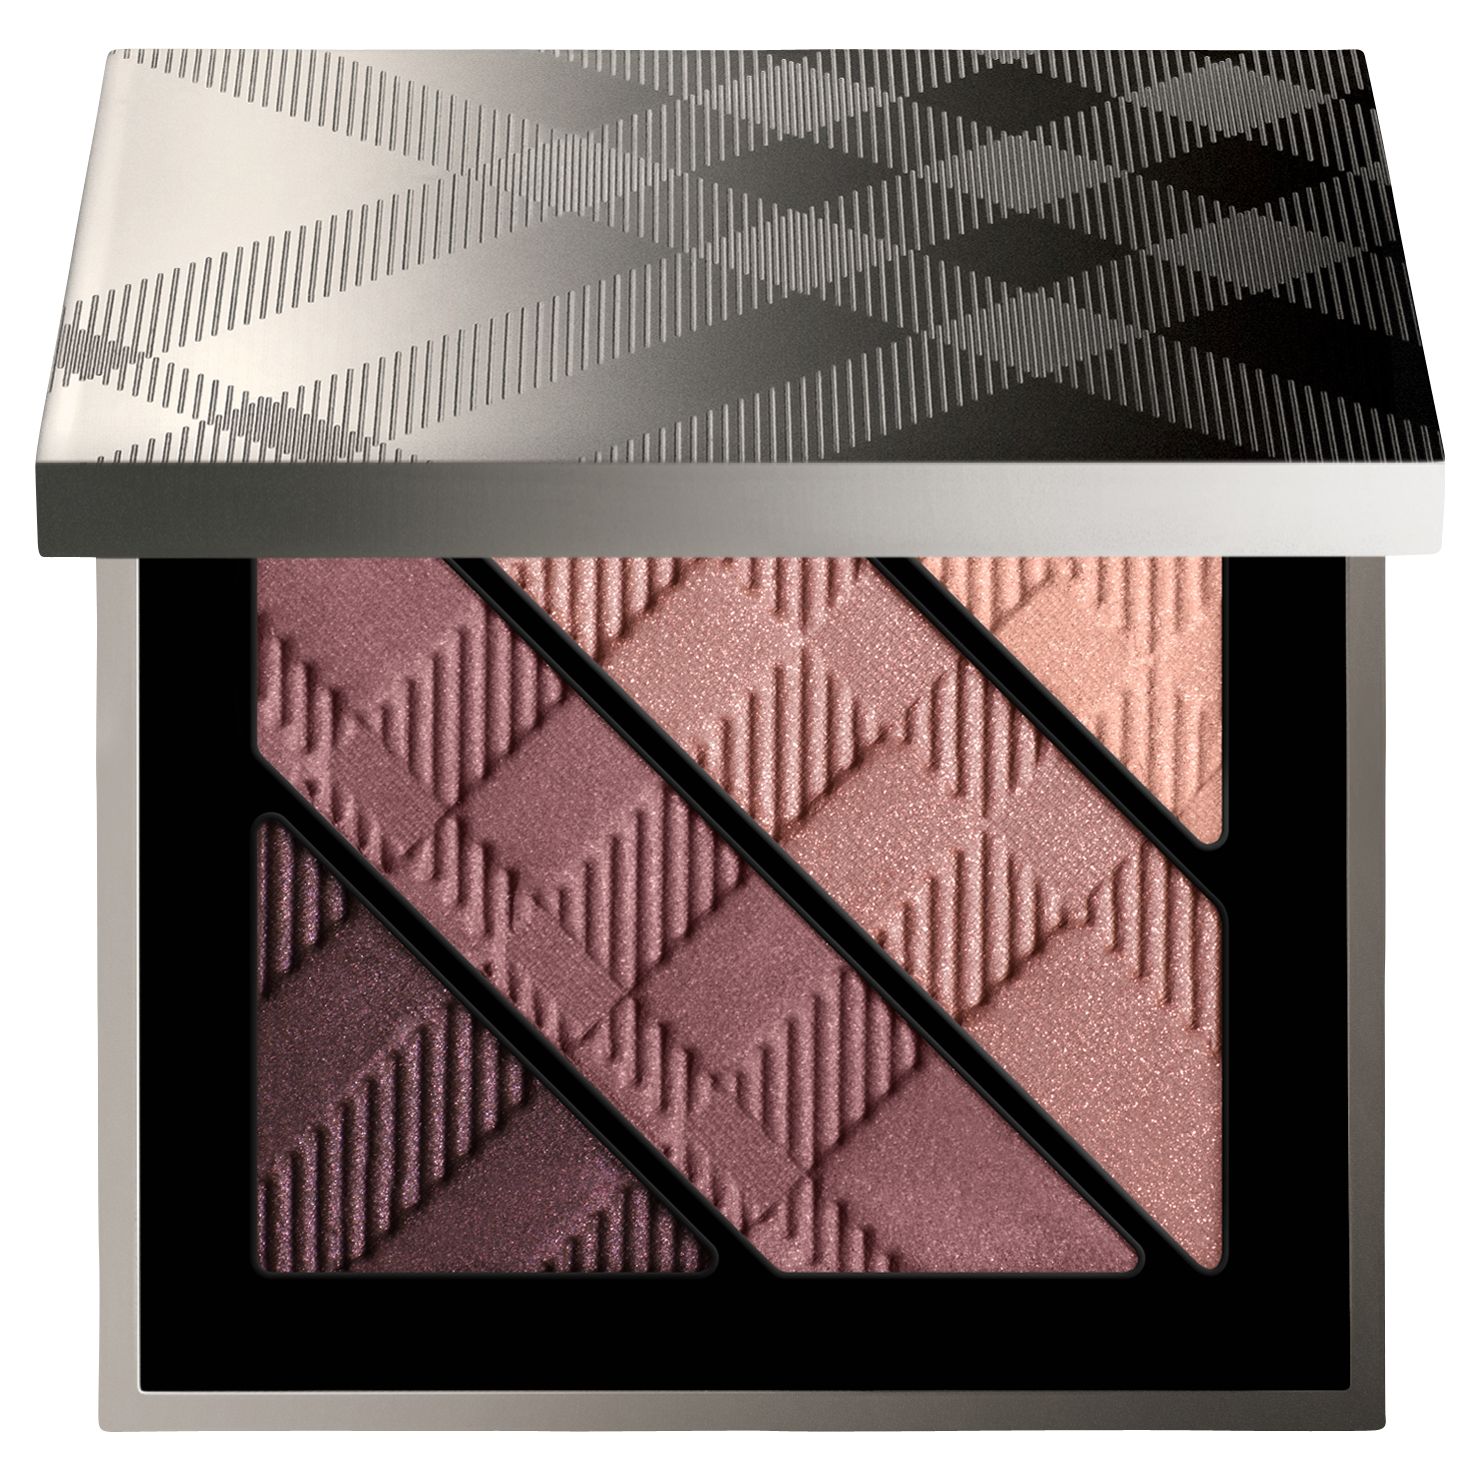 shop for Burberry Beauty Complete Eye Palette at Shopo